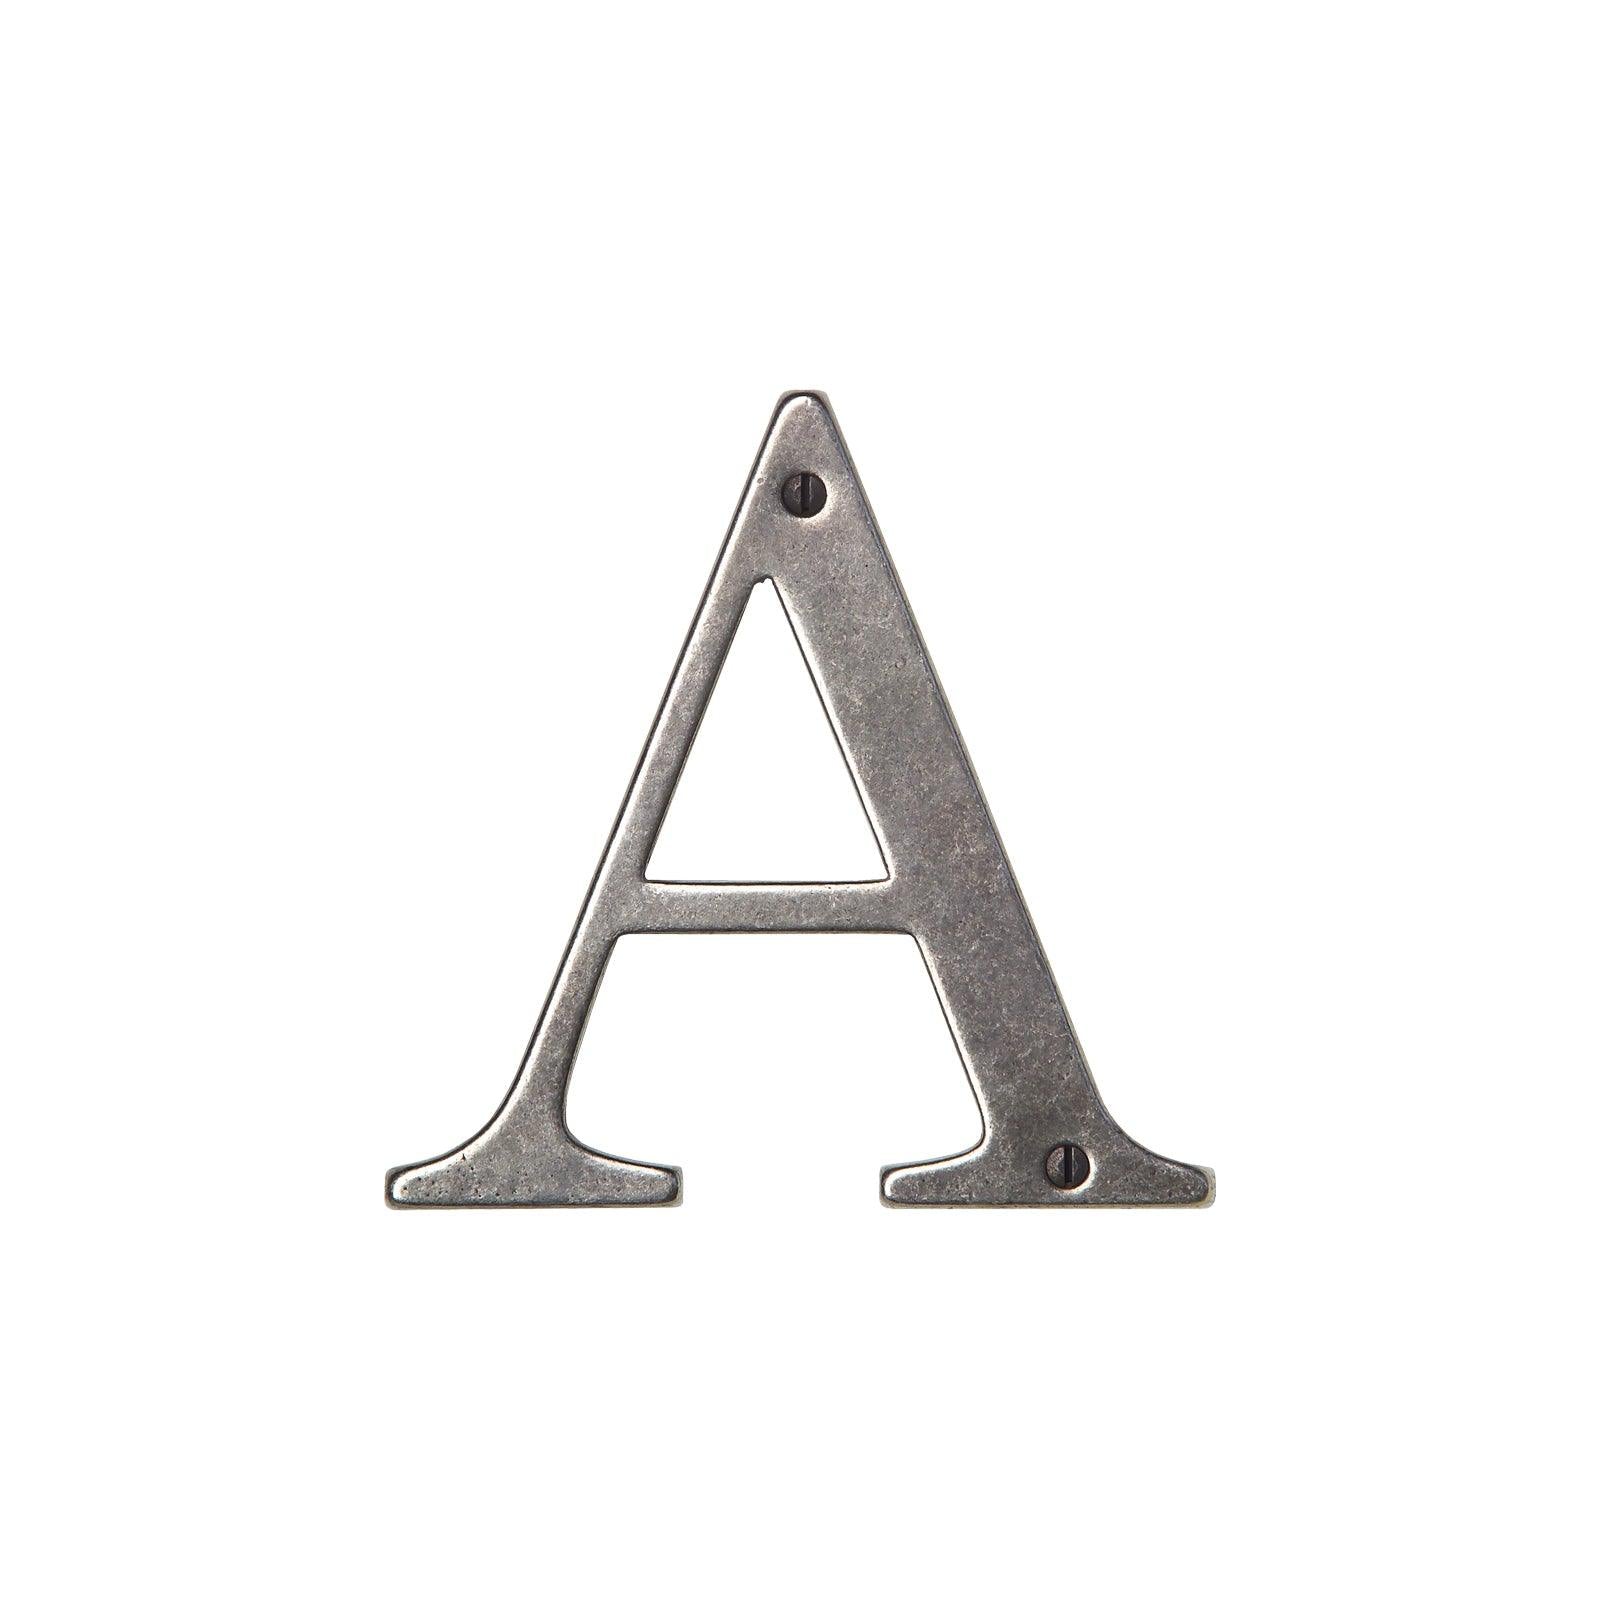 L400R - 4" House Letter “R" - Discount Rocky Mountain Hardware